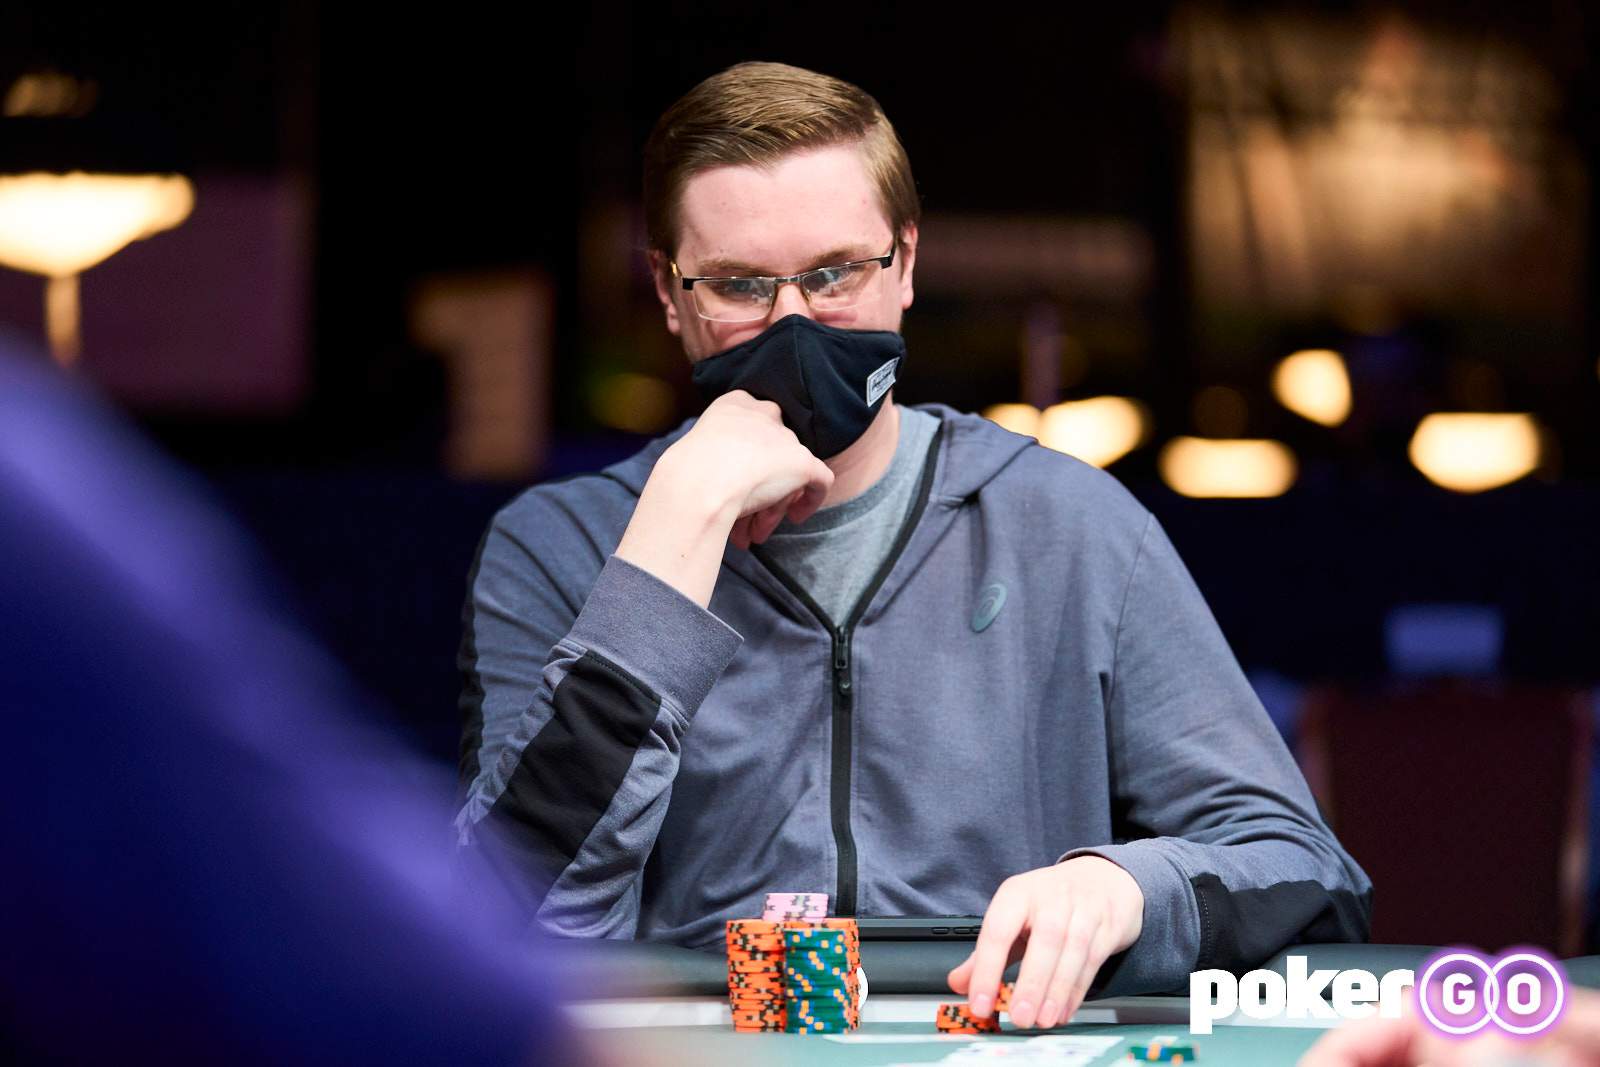 WSOP Day 23 Review: Gerhart Dominates H.O.R.S.E. While Zinno Eyes Another Big Run